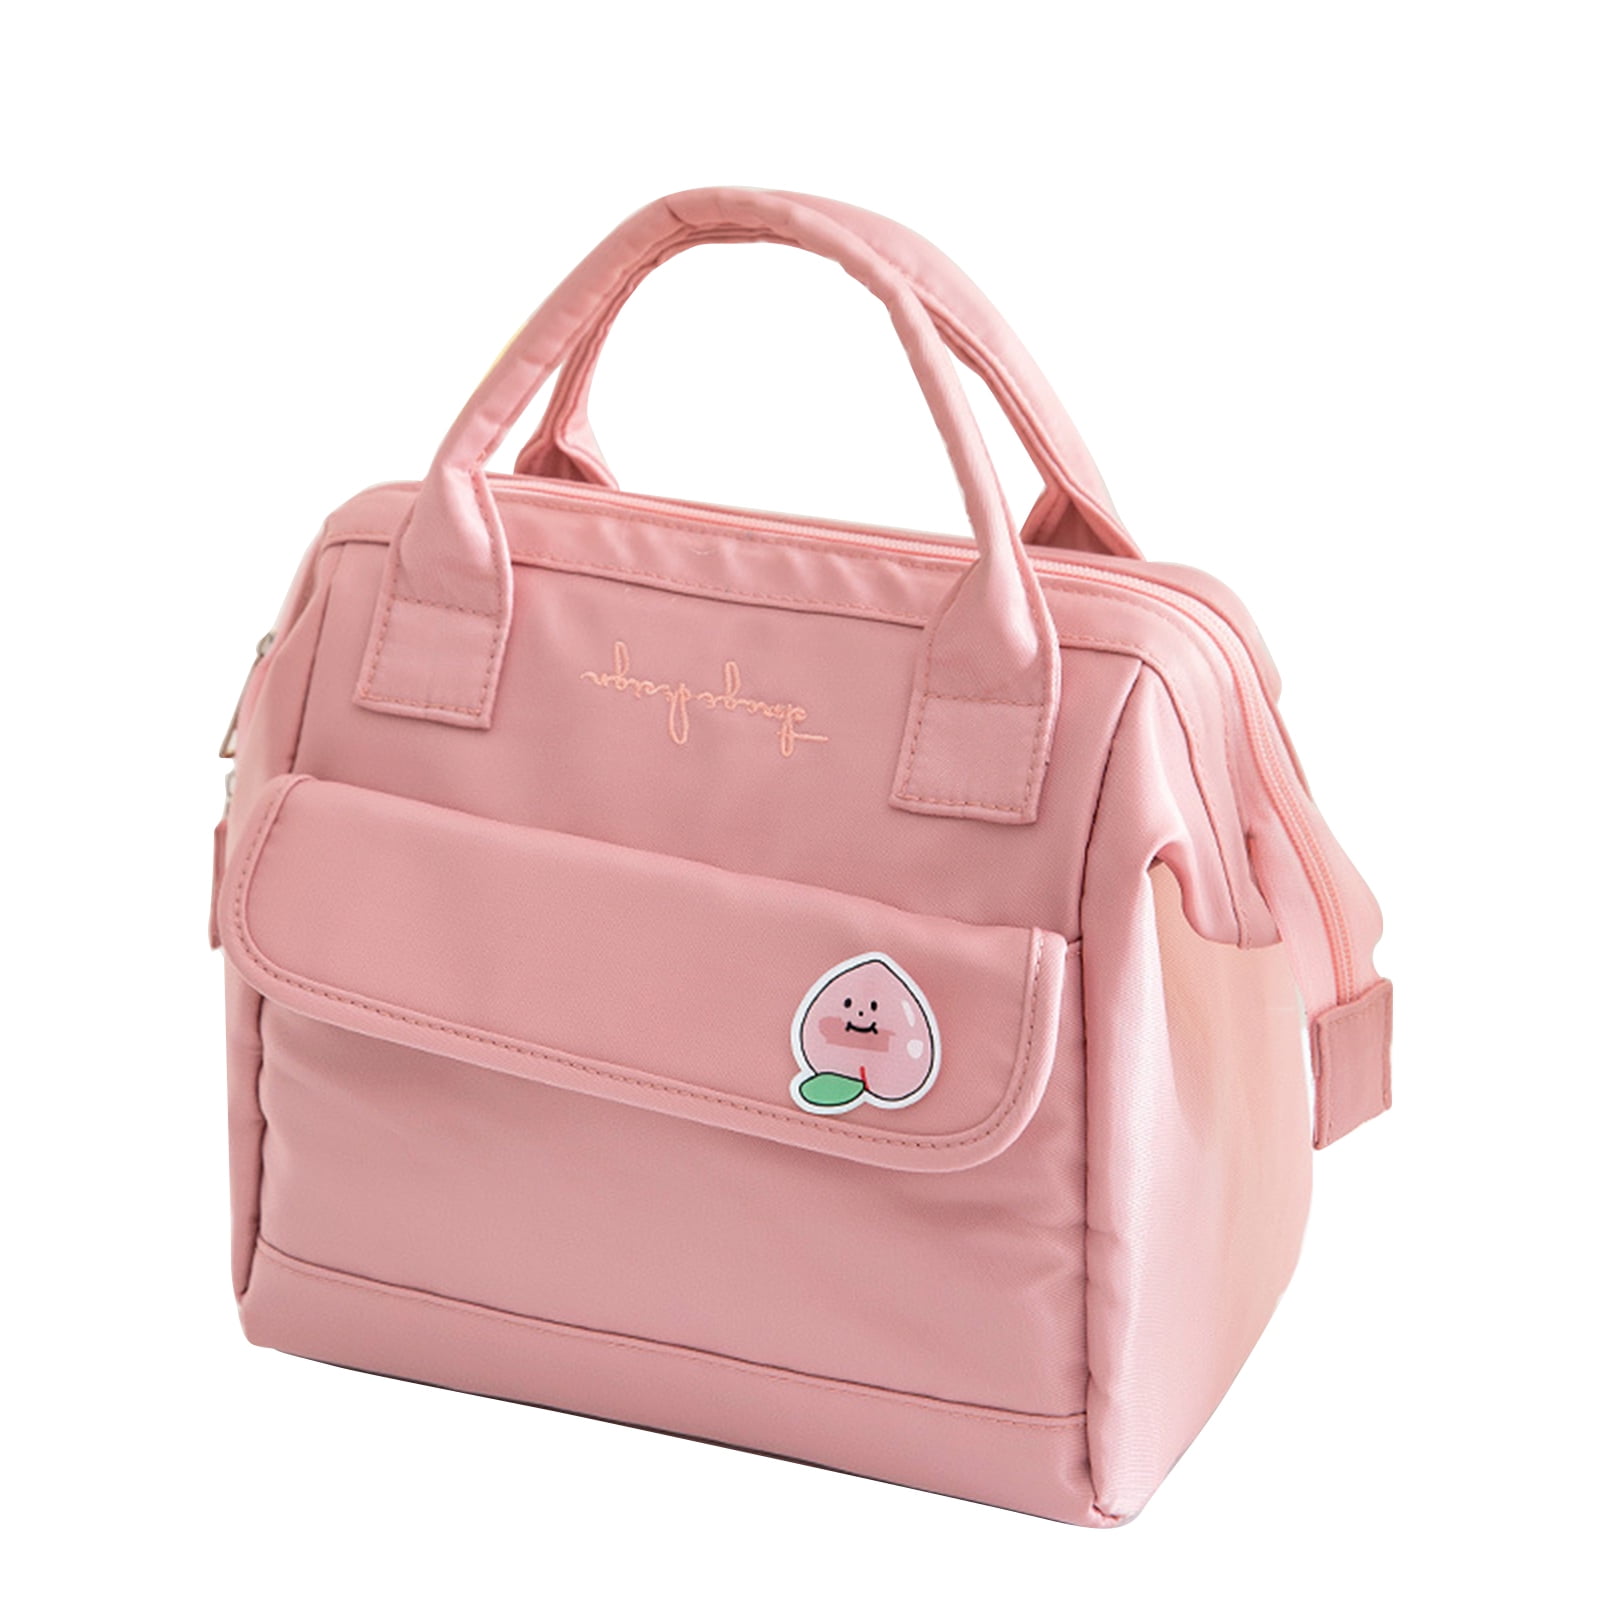 Details more than 76 aesthetic lunch bag latest - in.duhocakina